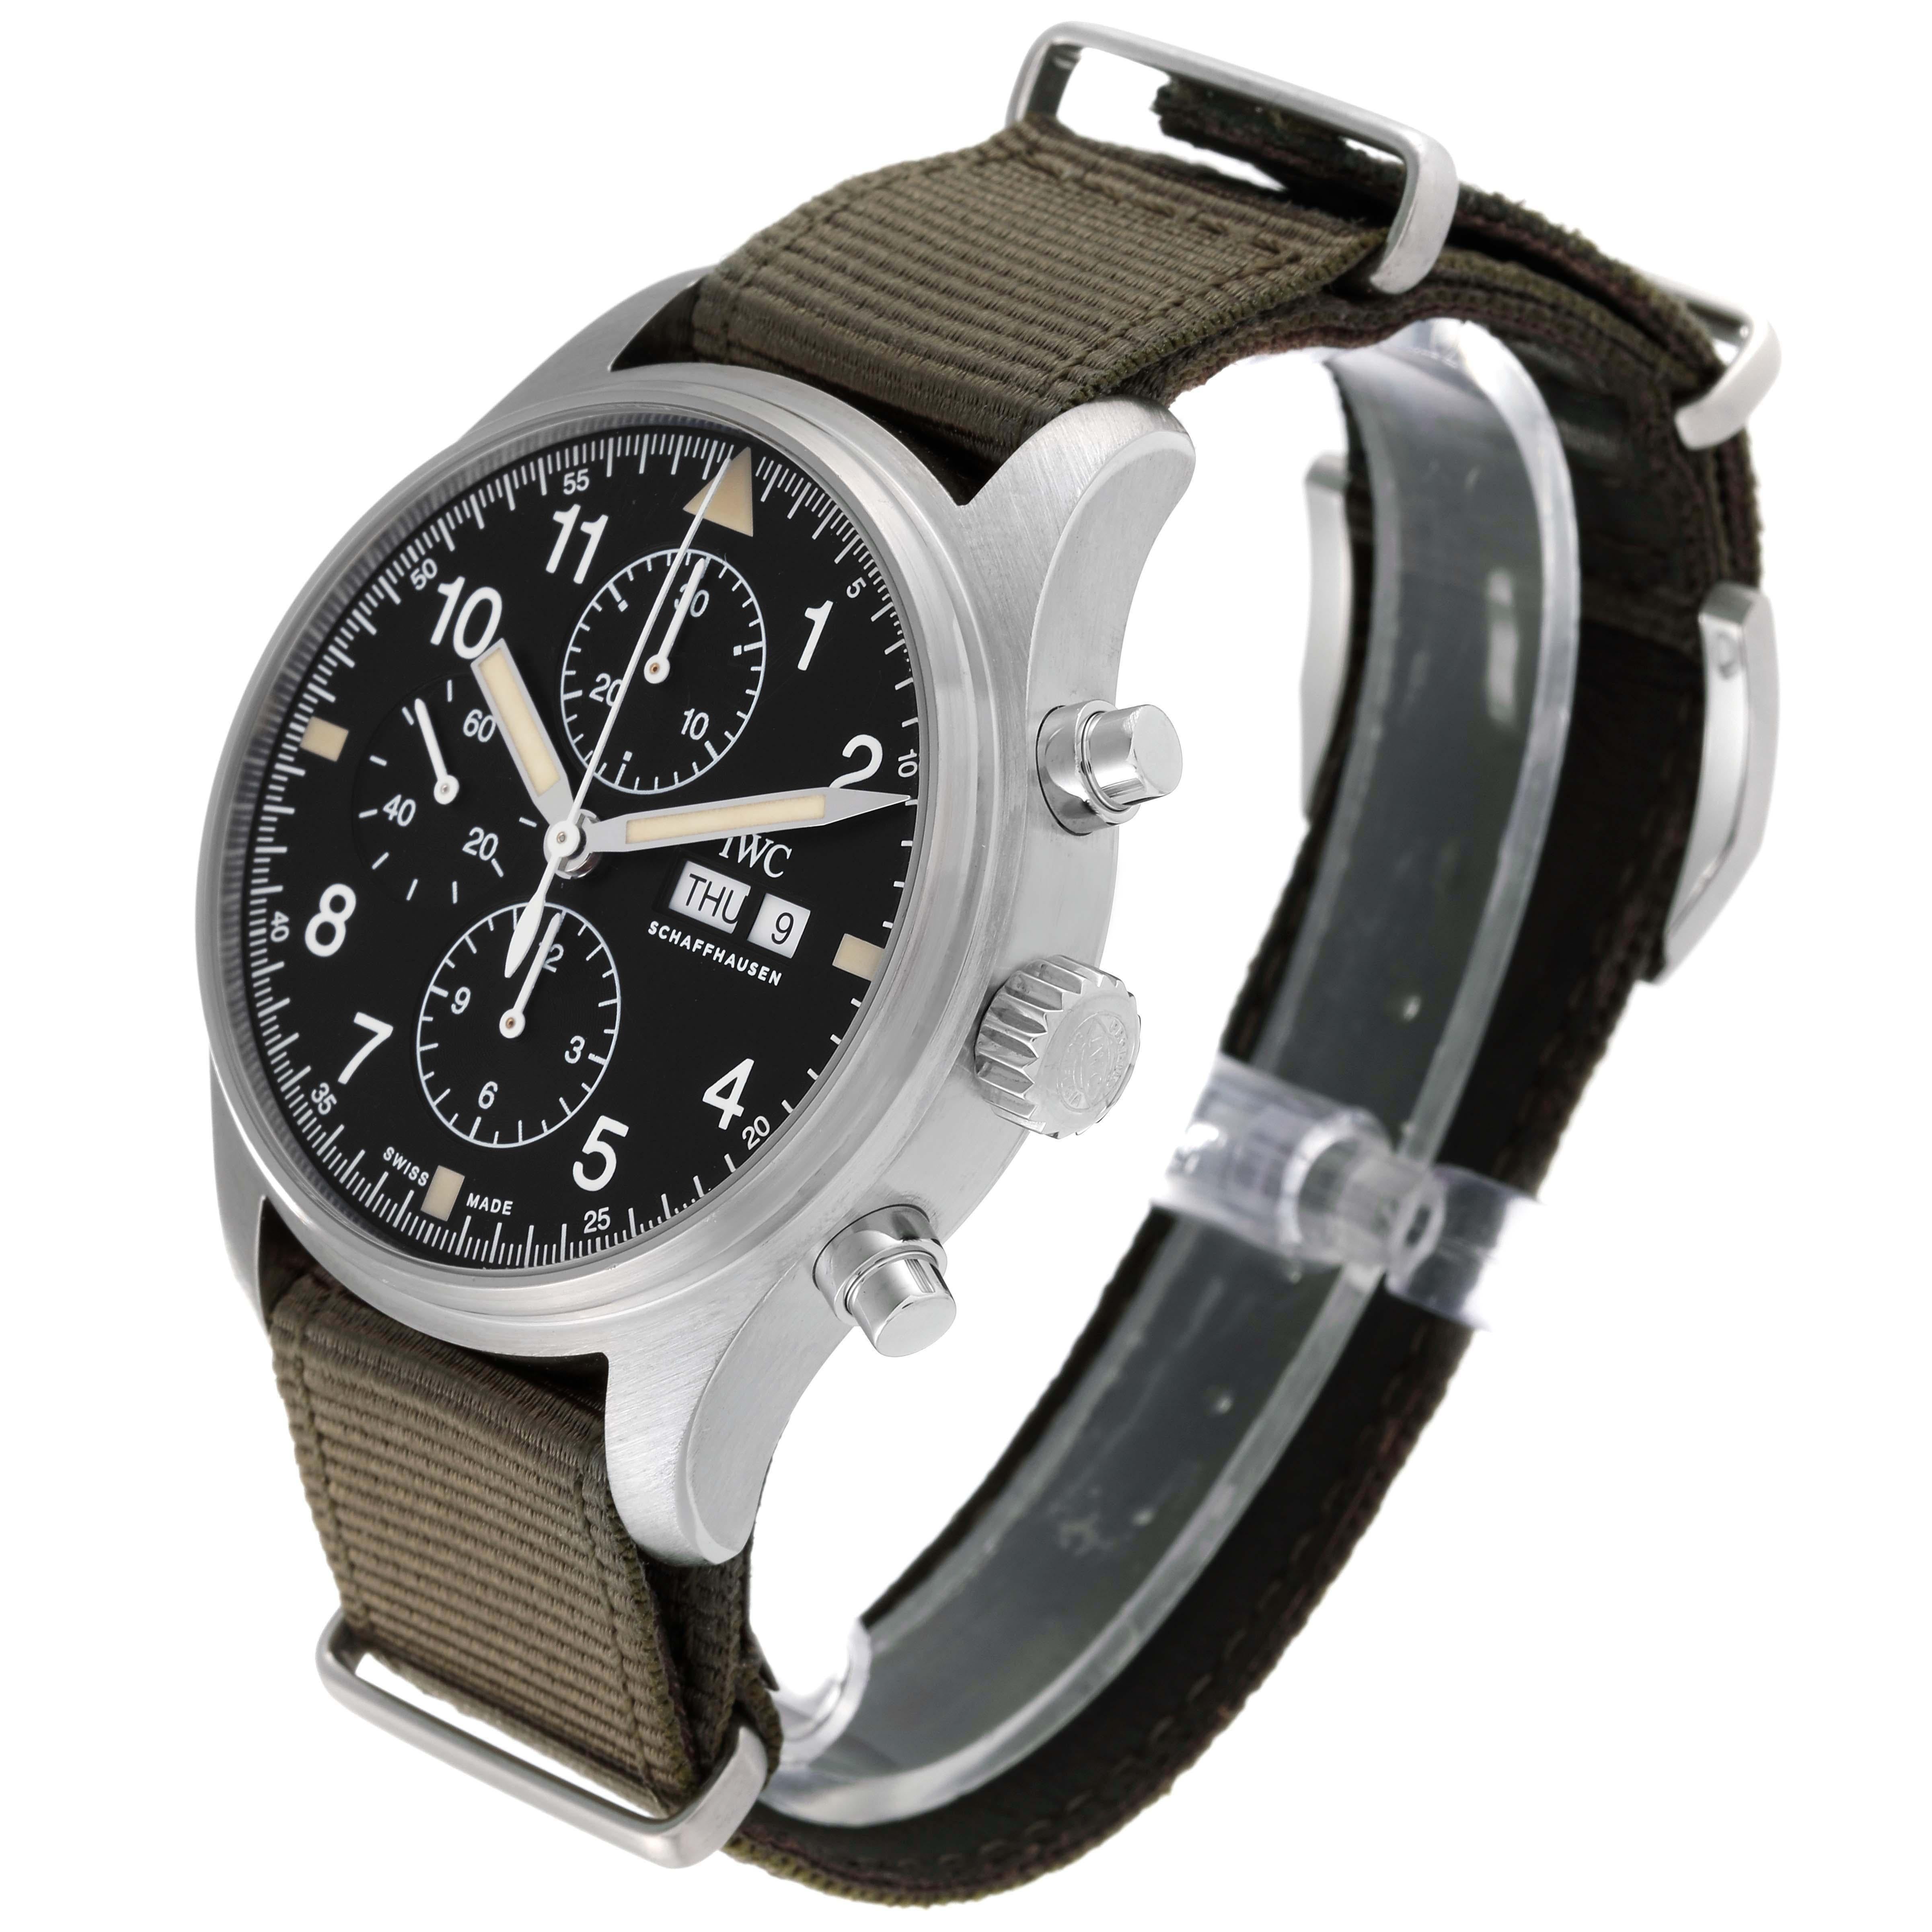 IWC Spitfire Pilot Steel Black Dial Chronograph Mens Watch IW377724 Box Card In Excellent Condition For Sale In Atlanta, GA